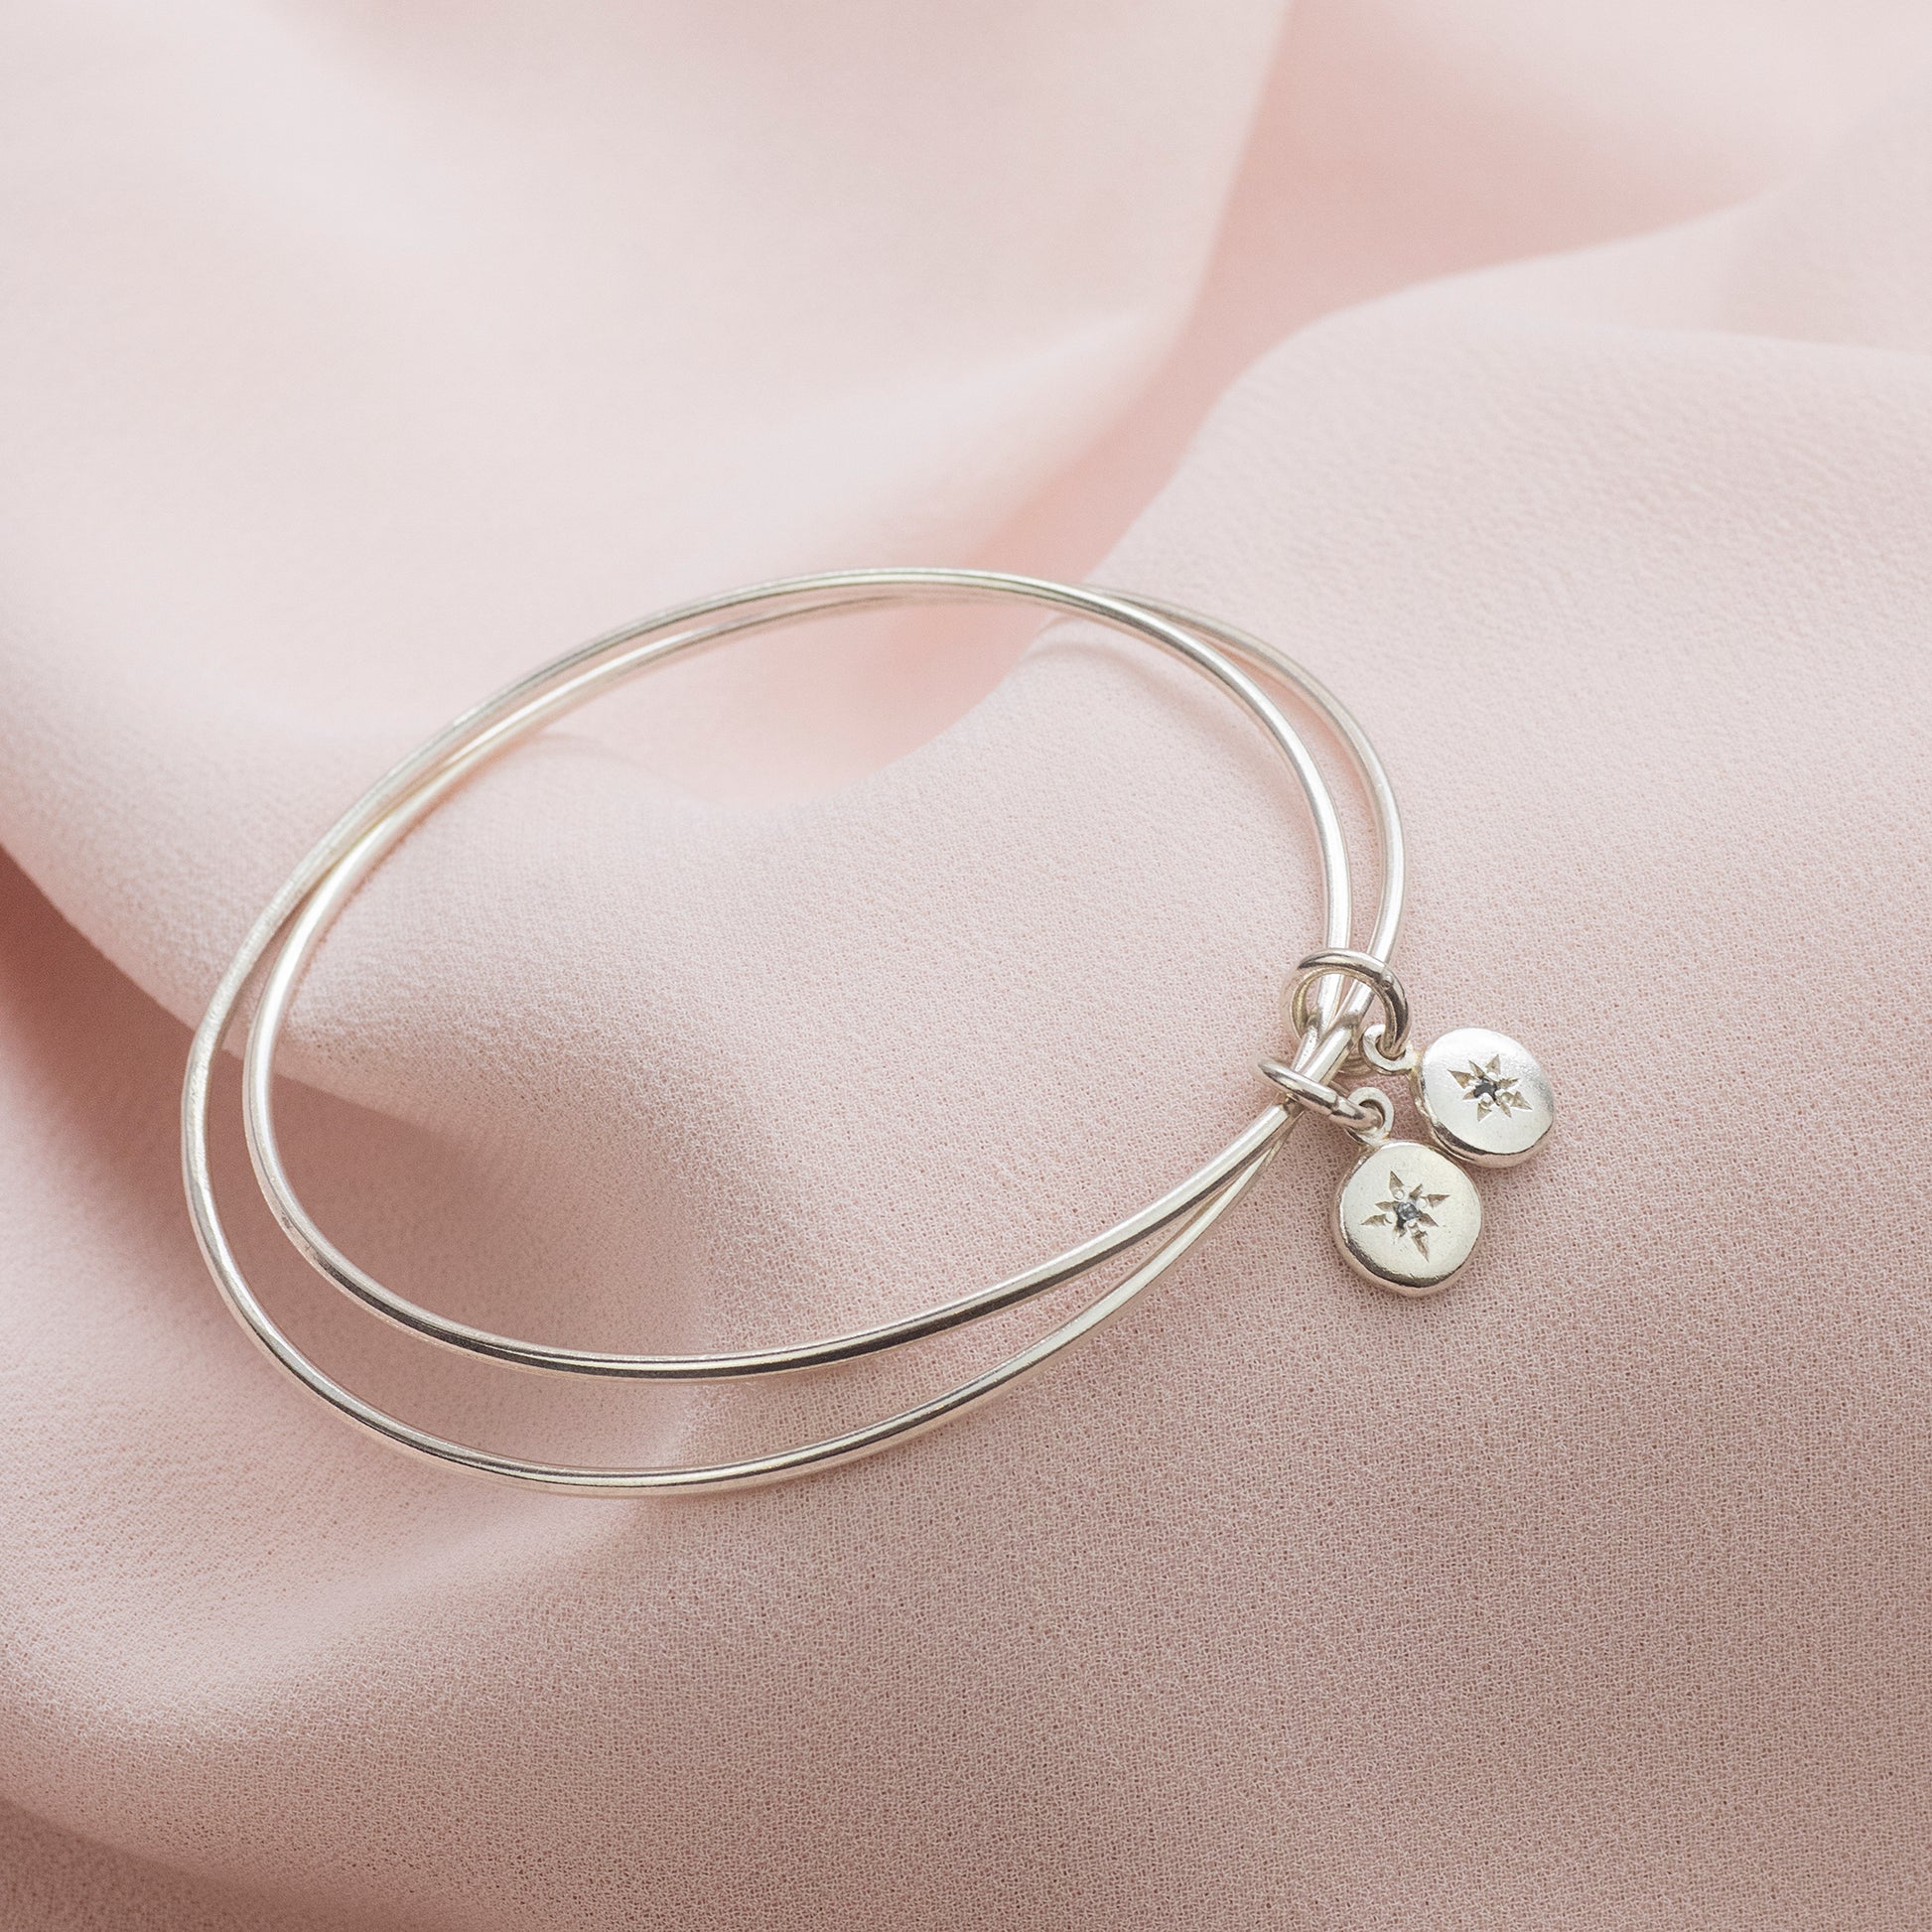 Personalised Aunt & Niece Bracelet - Double Linked Birthstone Bangle - Silver